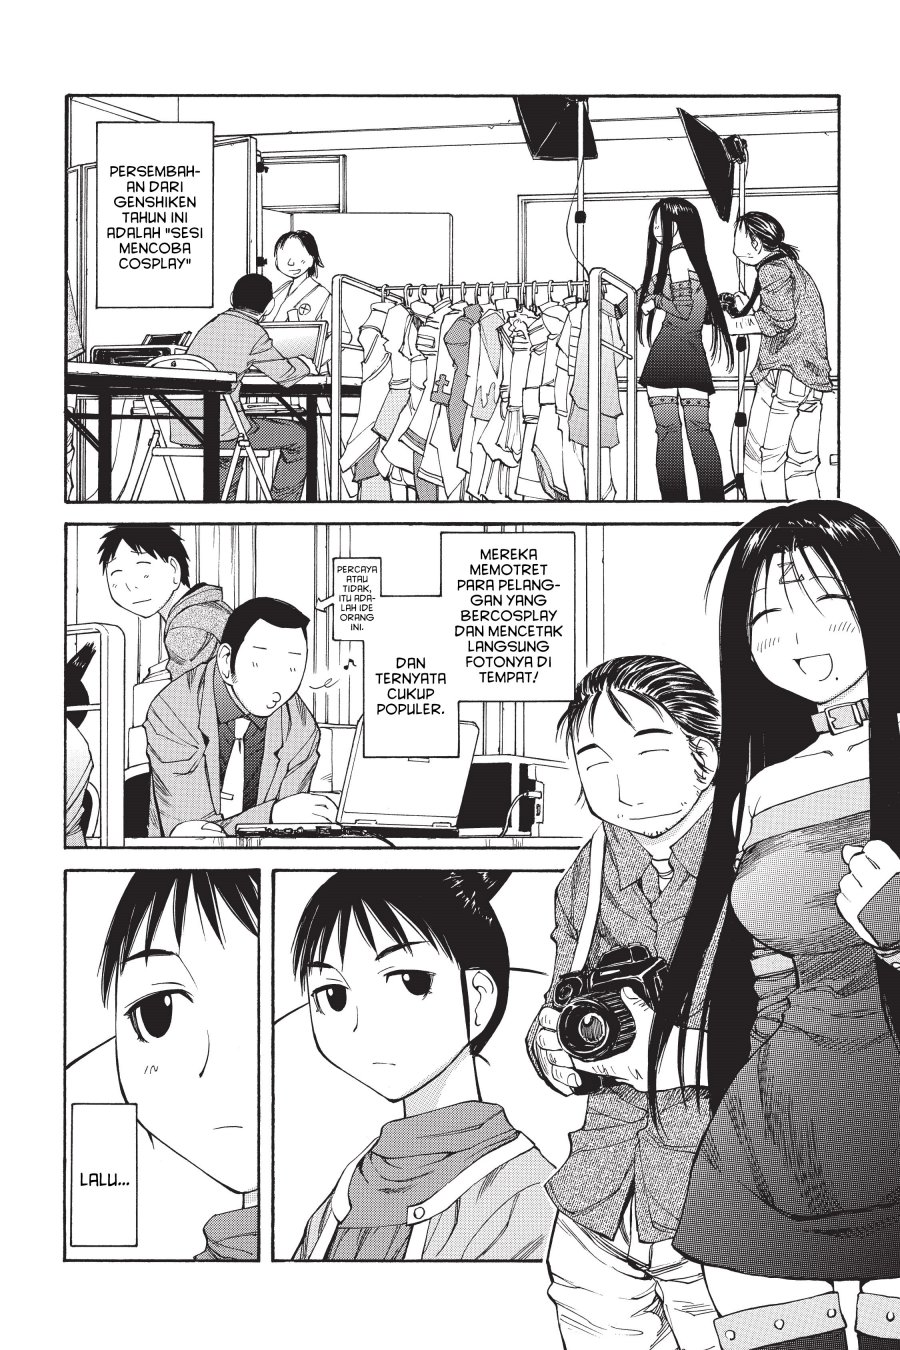 Genshiken – The Society for the Study of Modern Visual Culture Chapter 49 Image 2